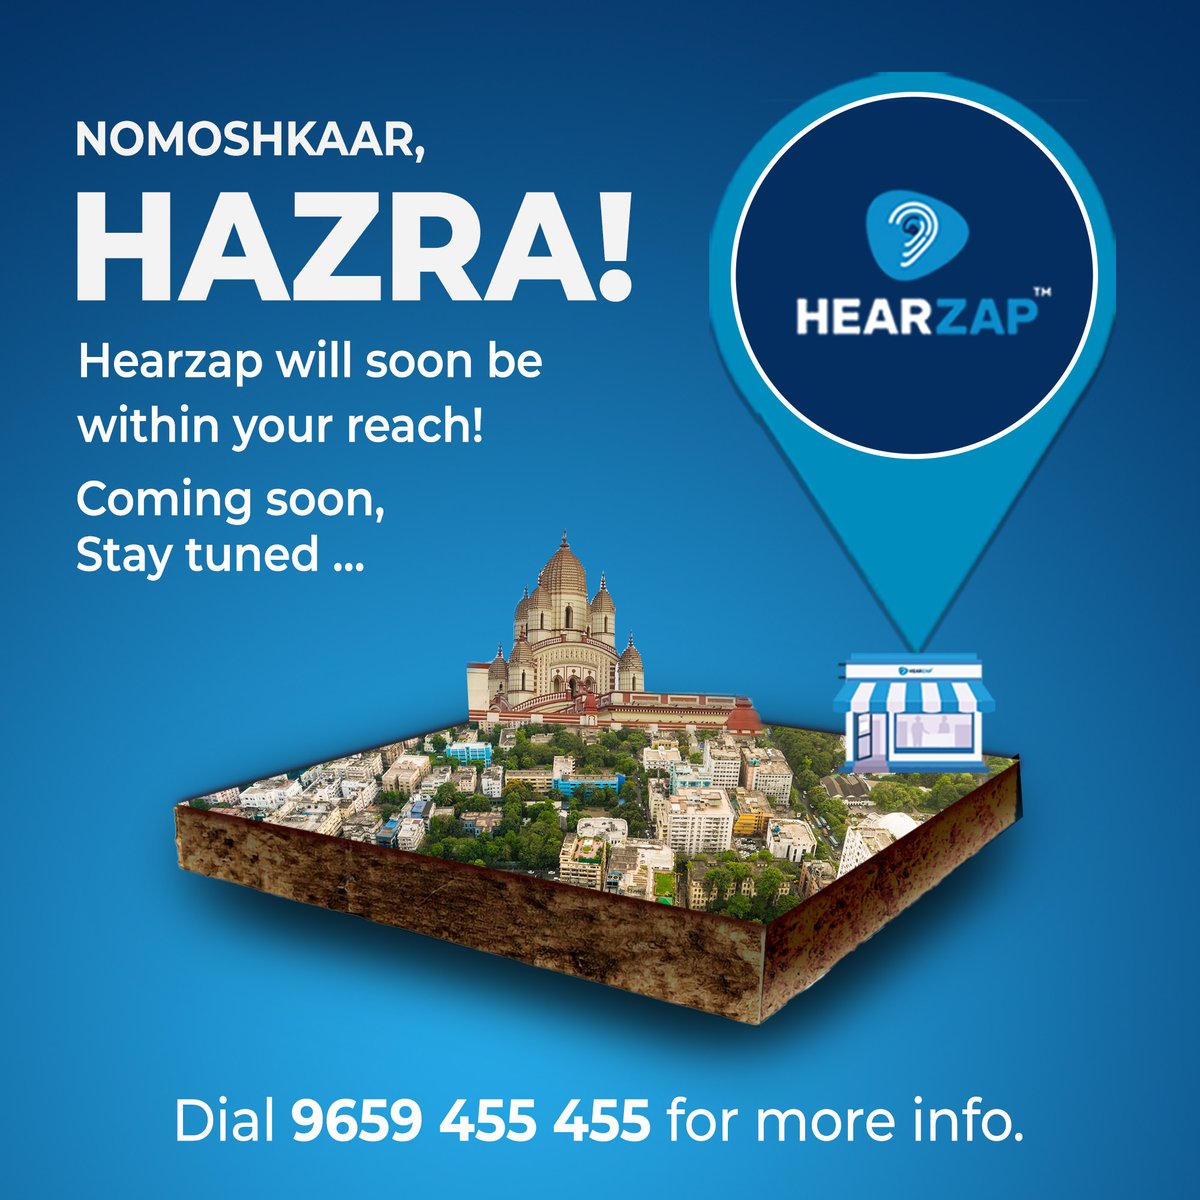 Soon, you will be able to hear the richness of life in #Hazra with absolute clarity! Hearzap is coming to your neighbourhood with top-notch hearing solutions. #Kolkata #WestBengal #hearzap #StayTuned